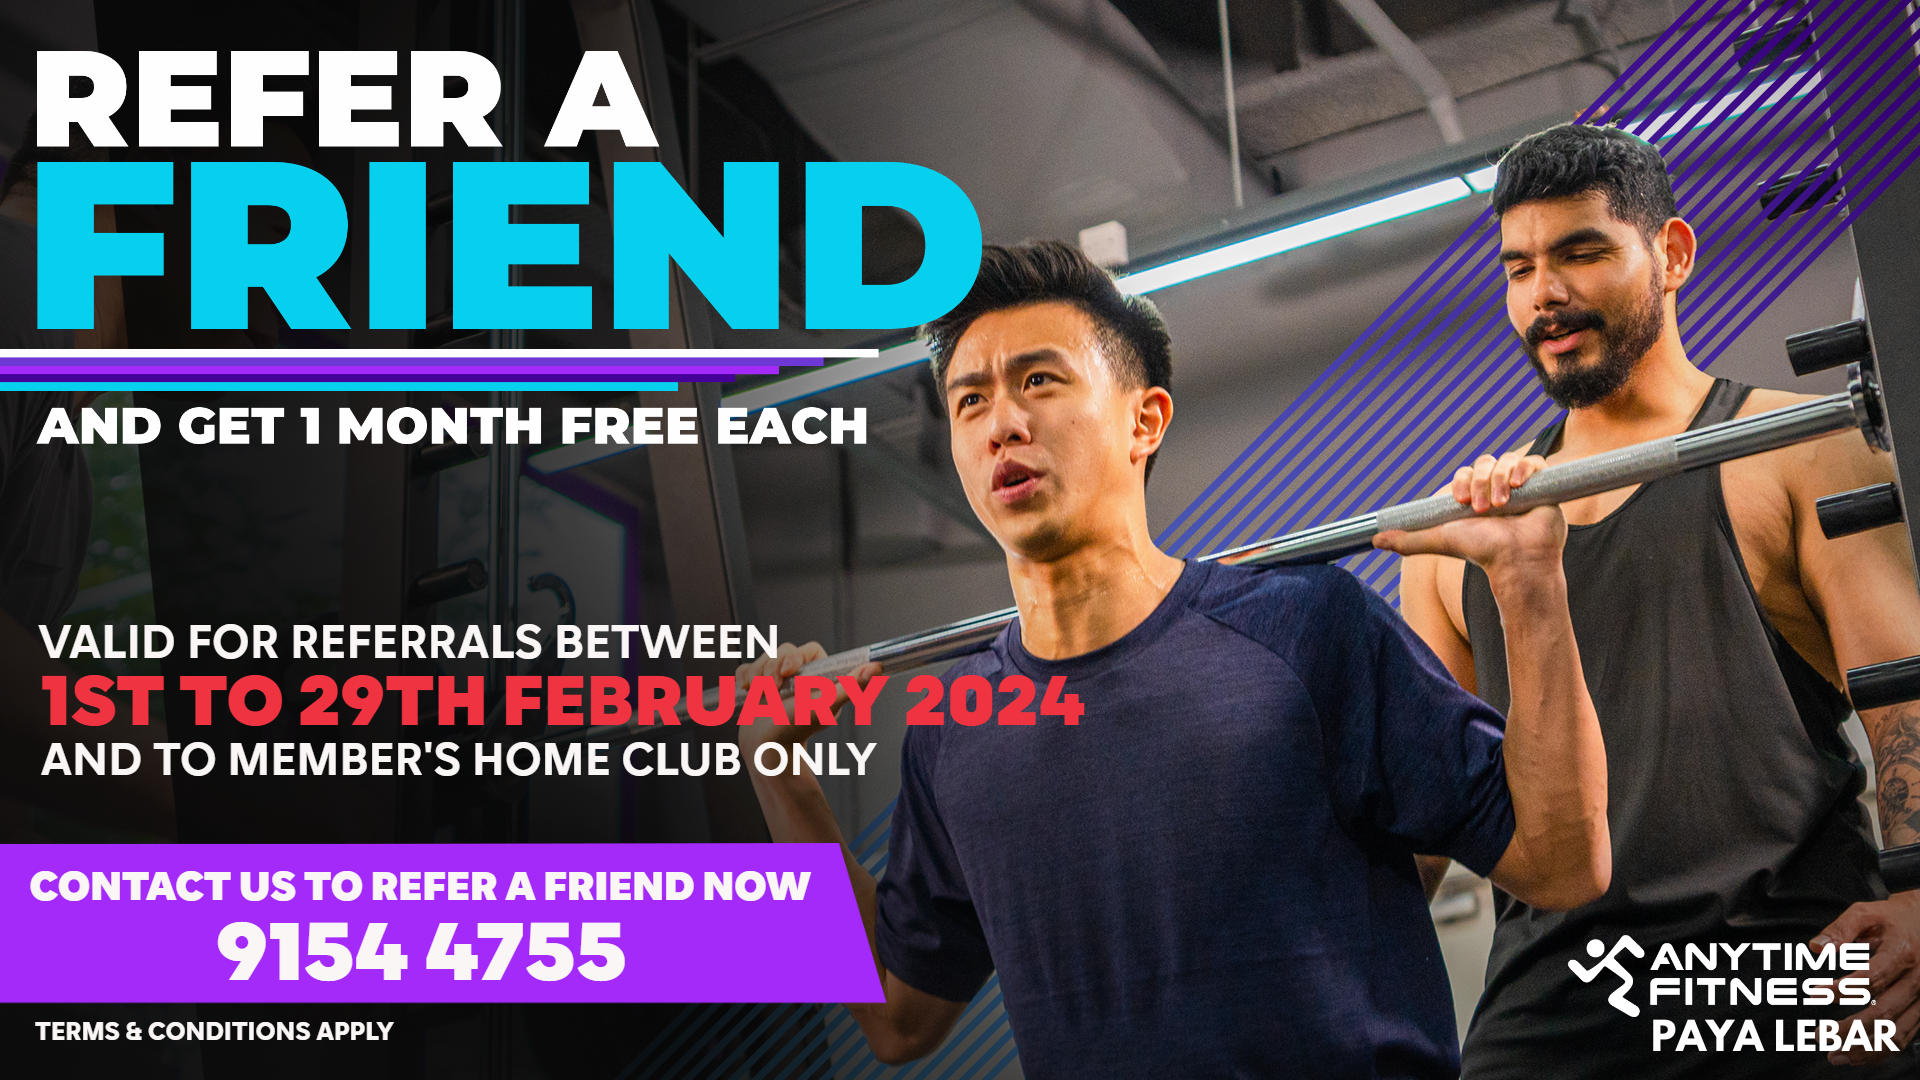 Anytime Fitness Paya Lebar - Refer a Friend, Get 1 Month FREE Each